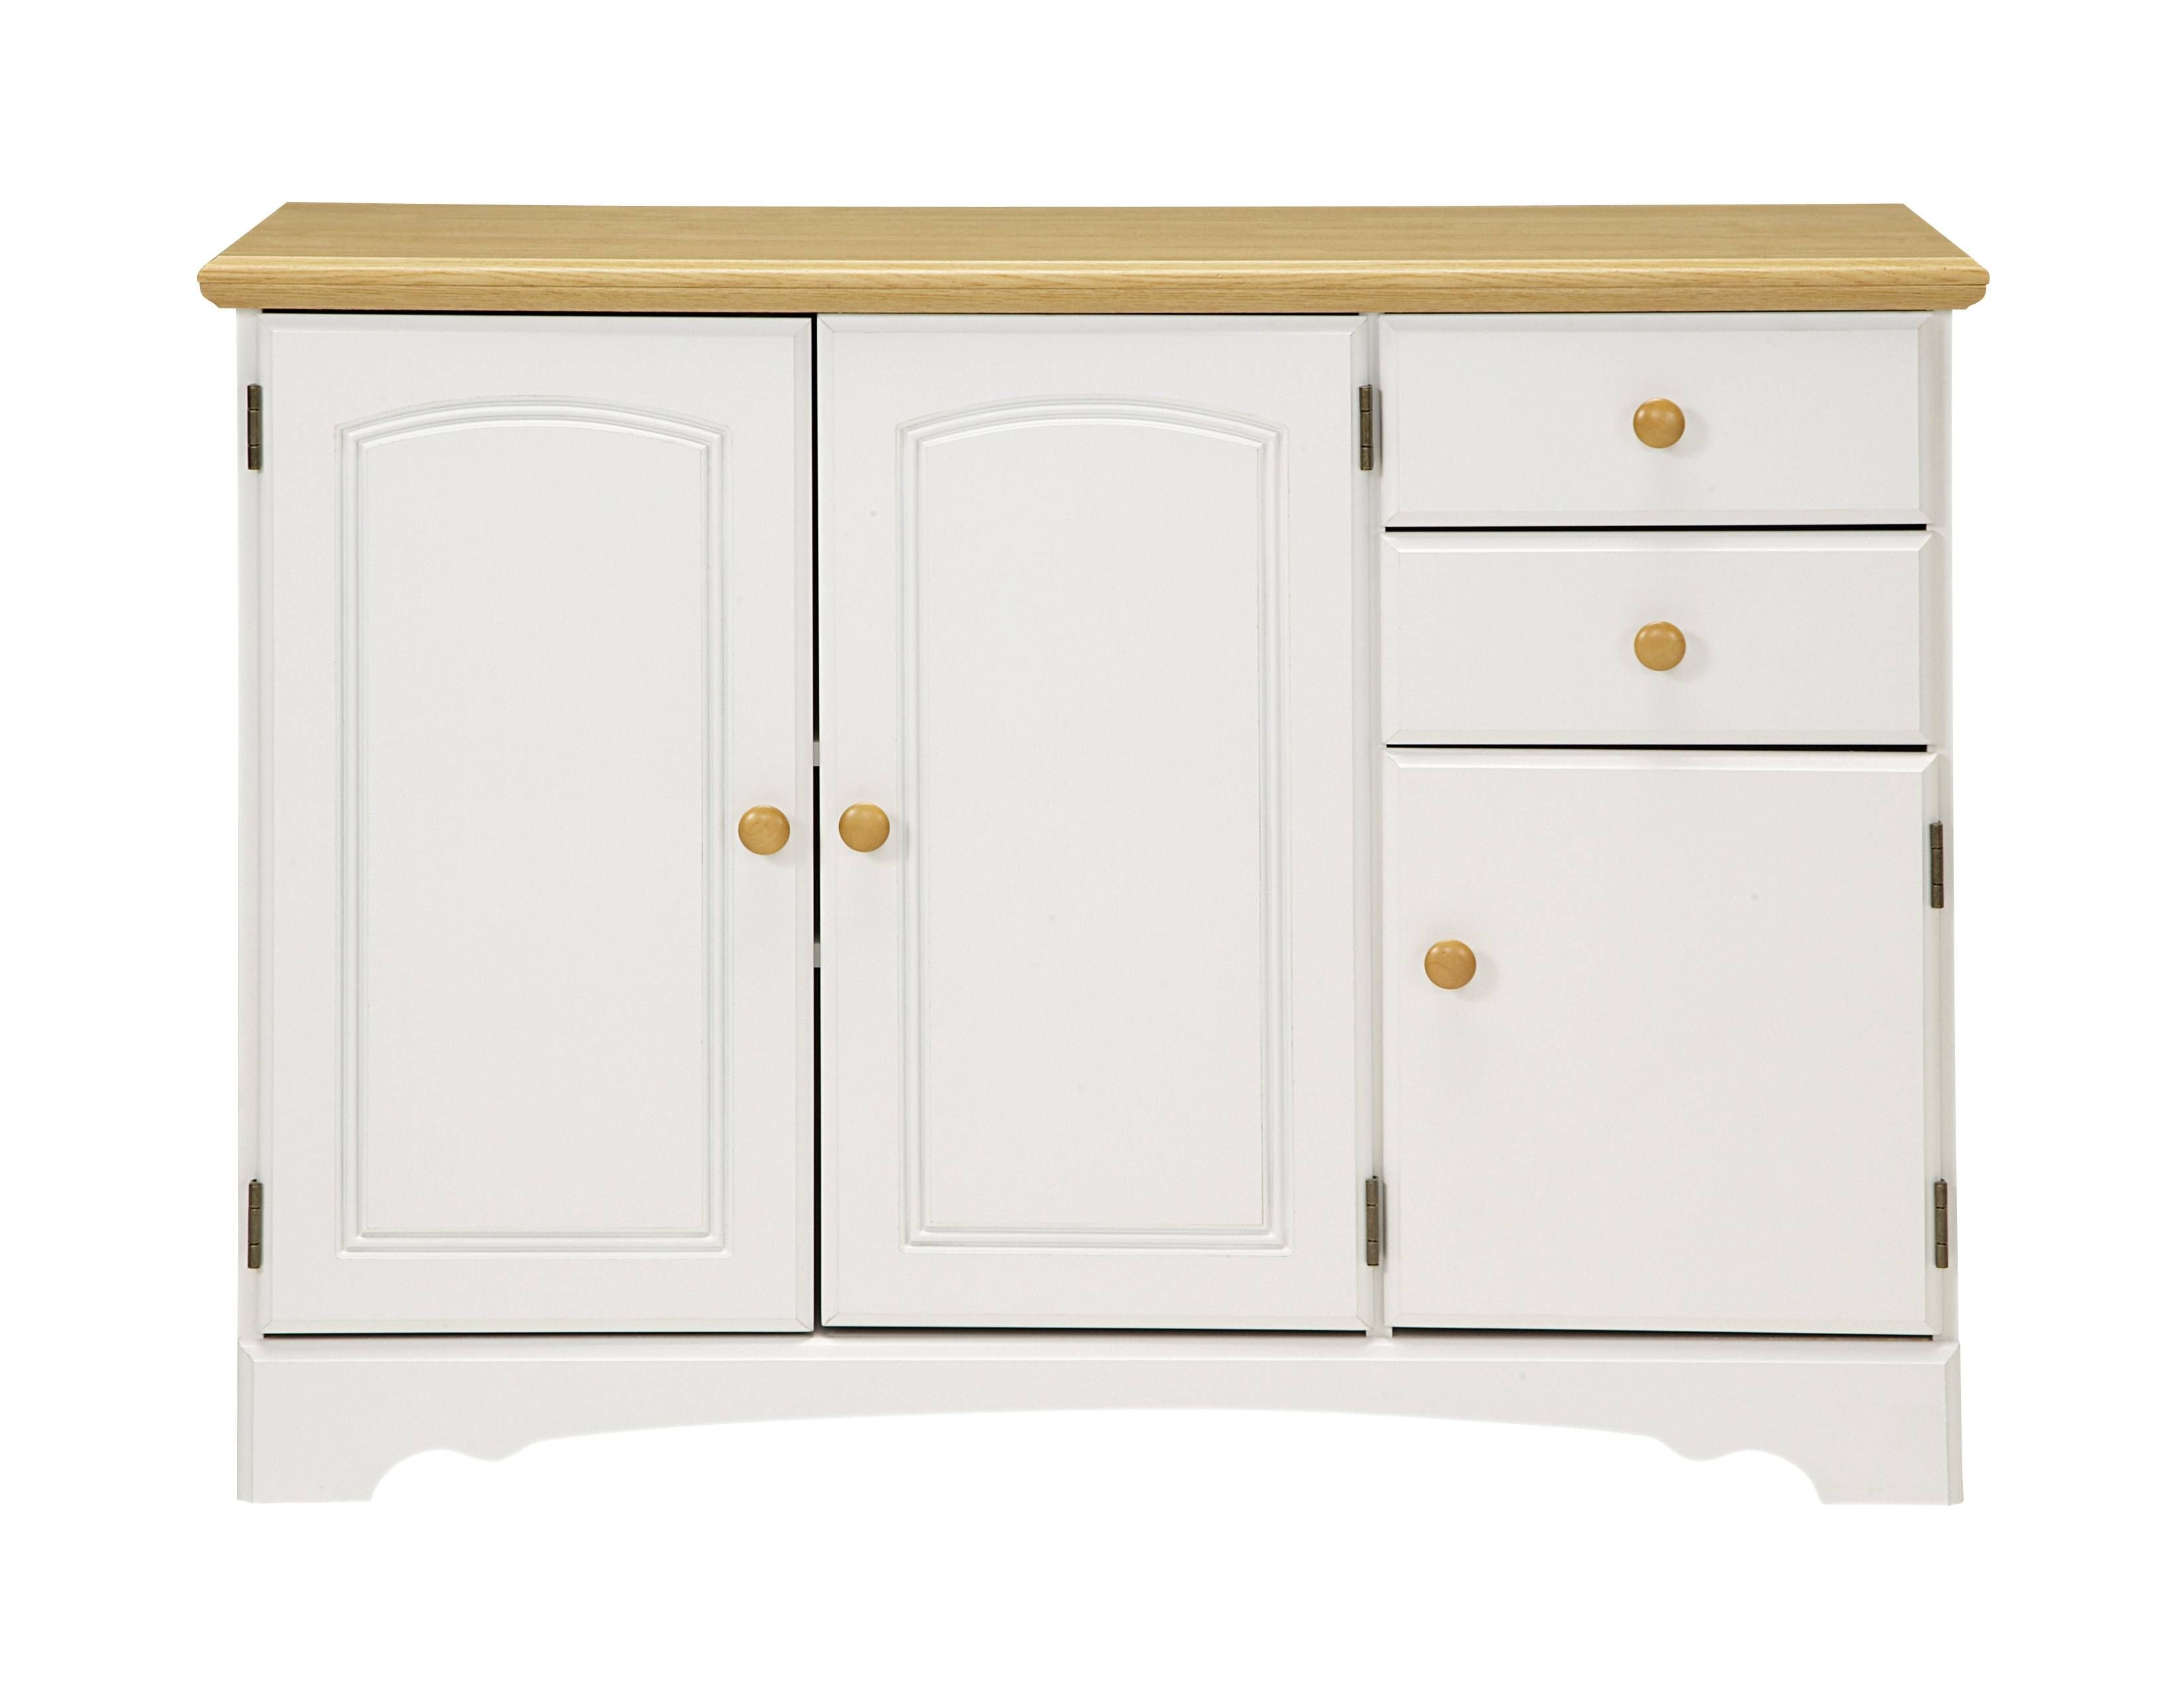 Furniture: Narrow Buffet Table | Sideboards And Buffets Vintage With White Wooden Sideboards (View 22 of 30)